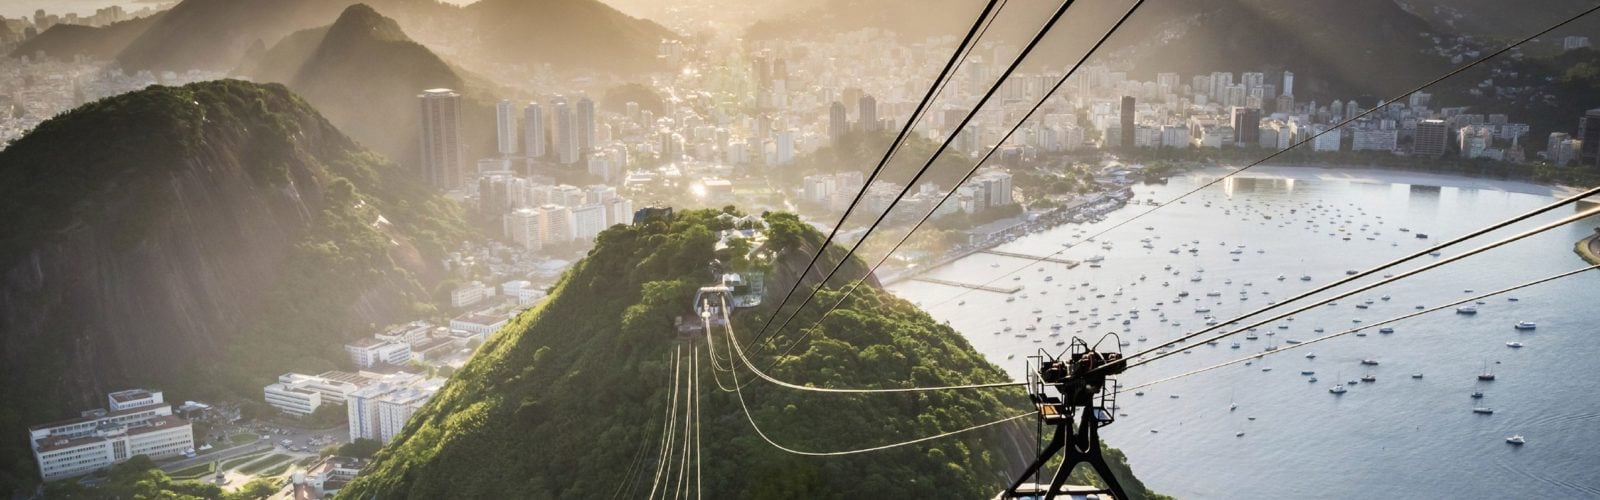 View from the Sugarloaf cable car, Rio de Janeiro